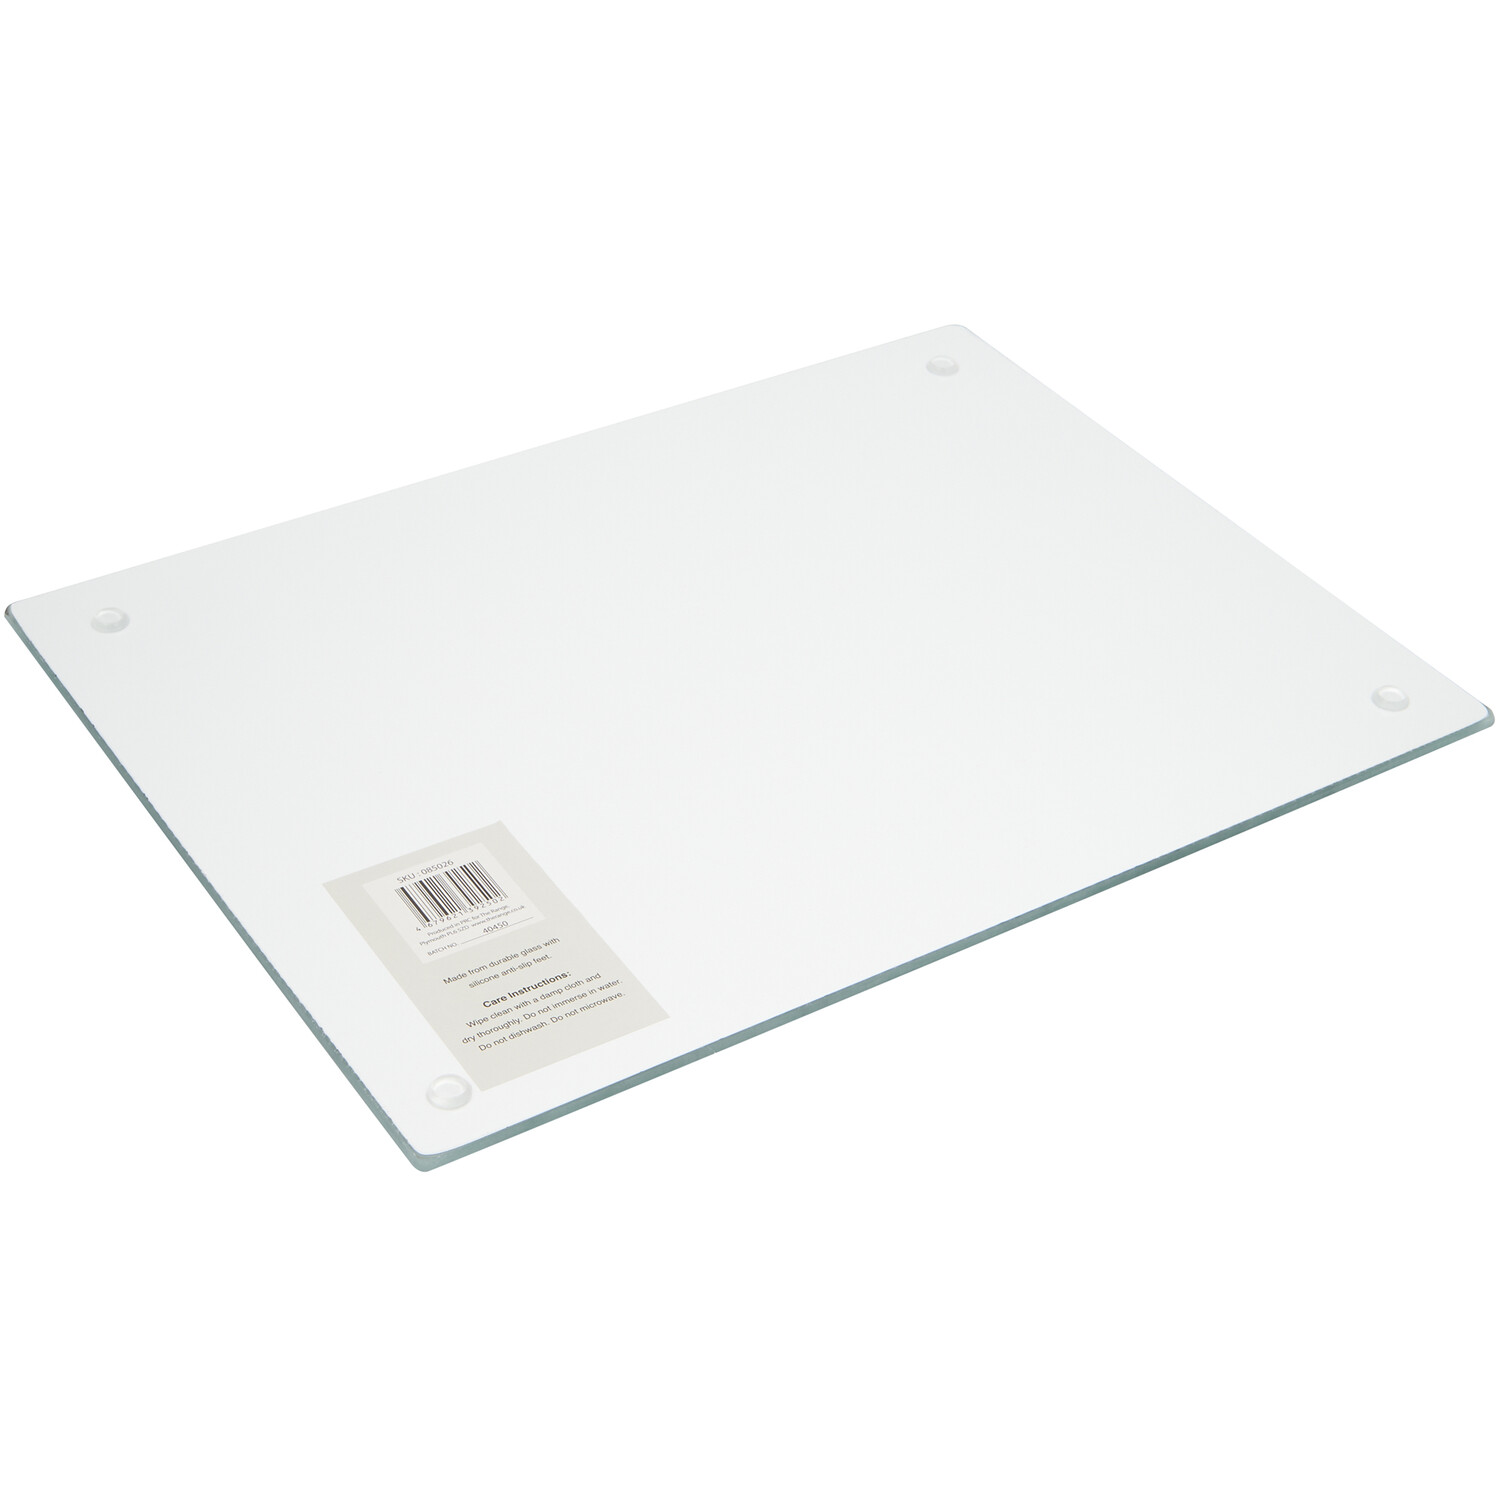 Speckle Glass Worktop Saver - Clear Image 4